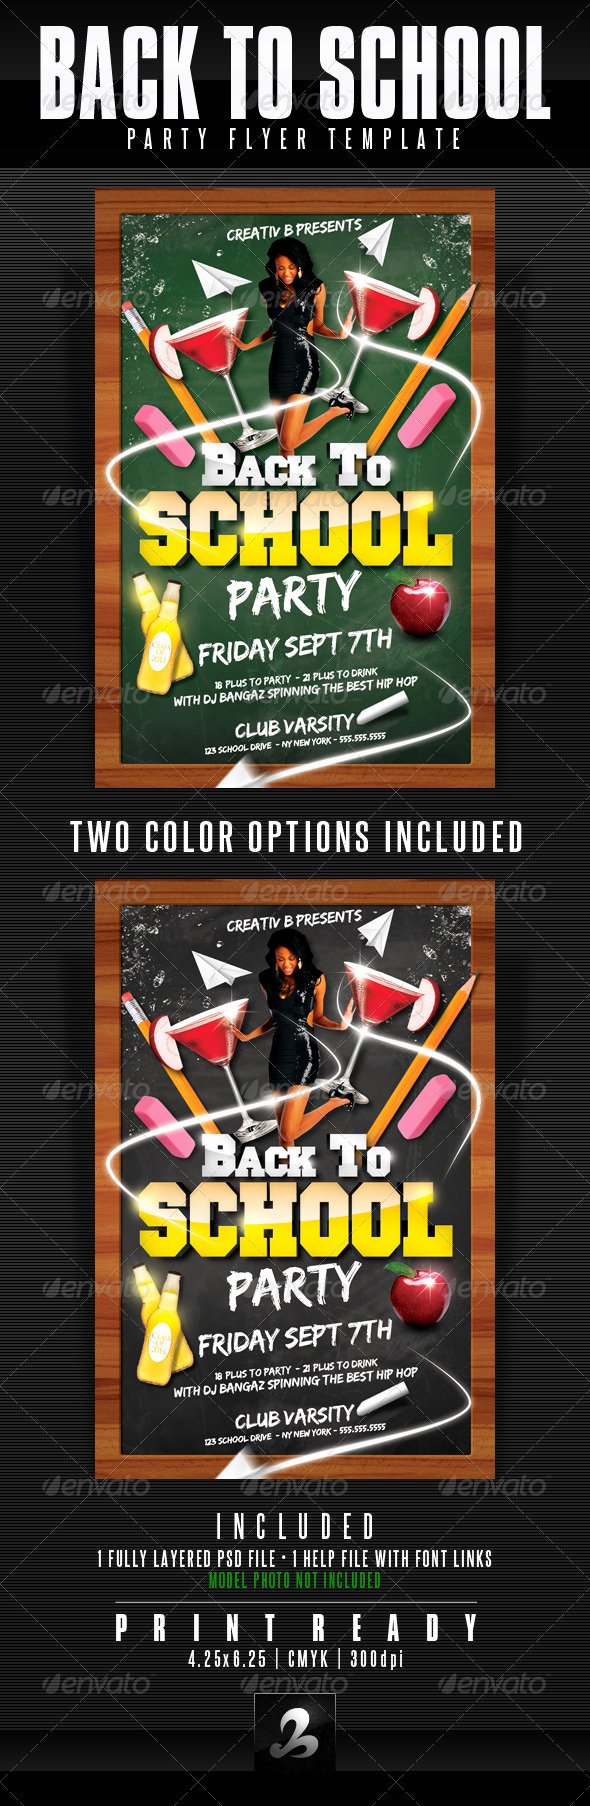 School Club Flyer Template Lovely Back to School Party Flyer Template